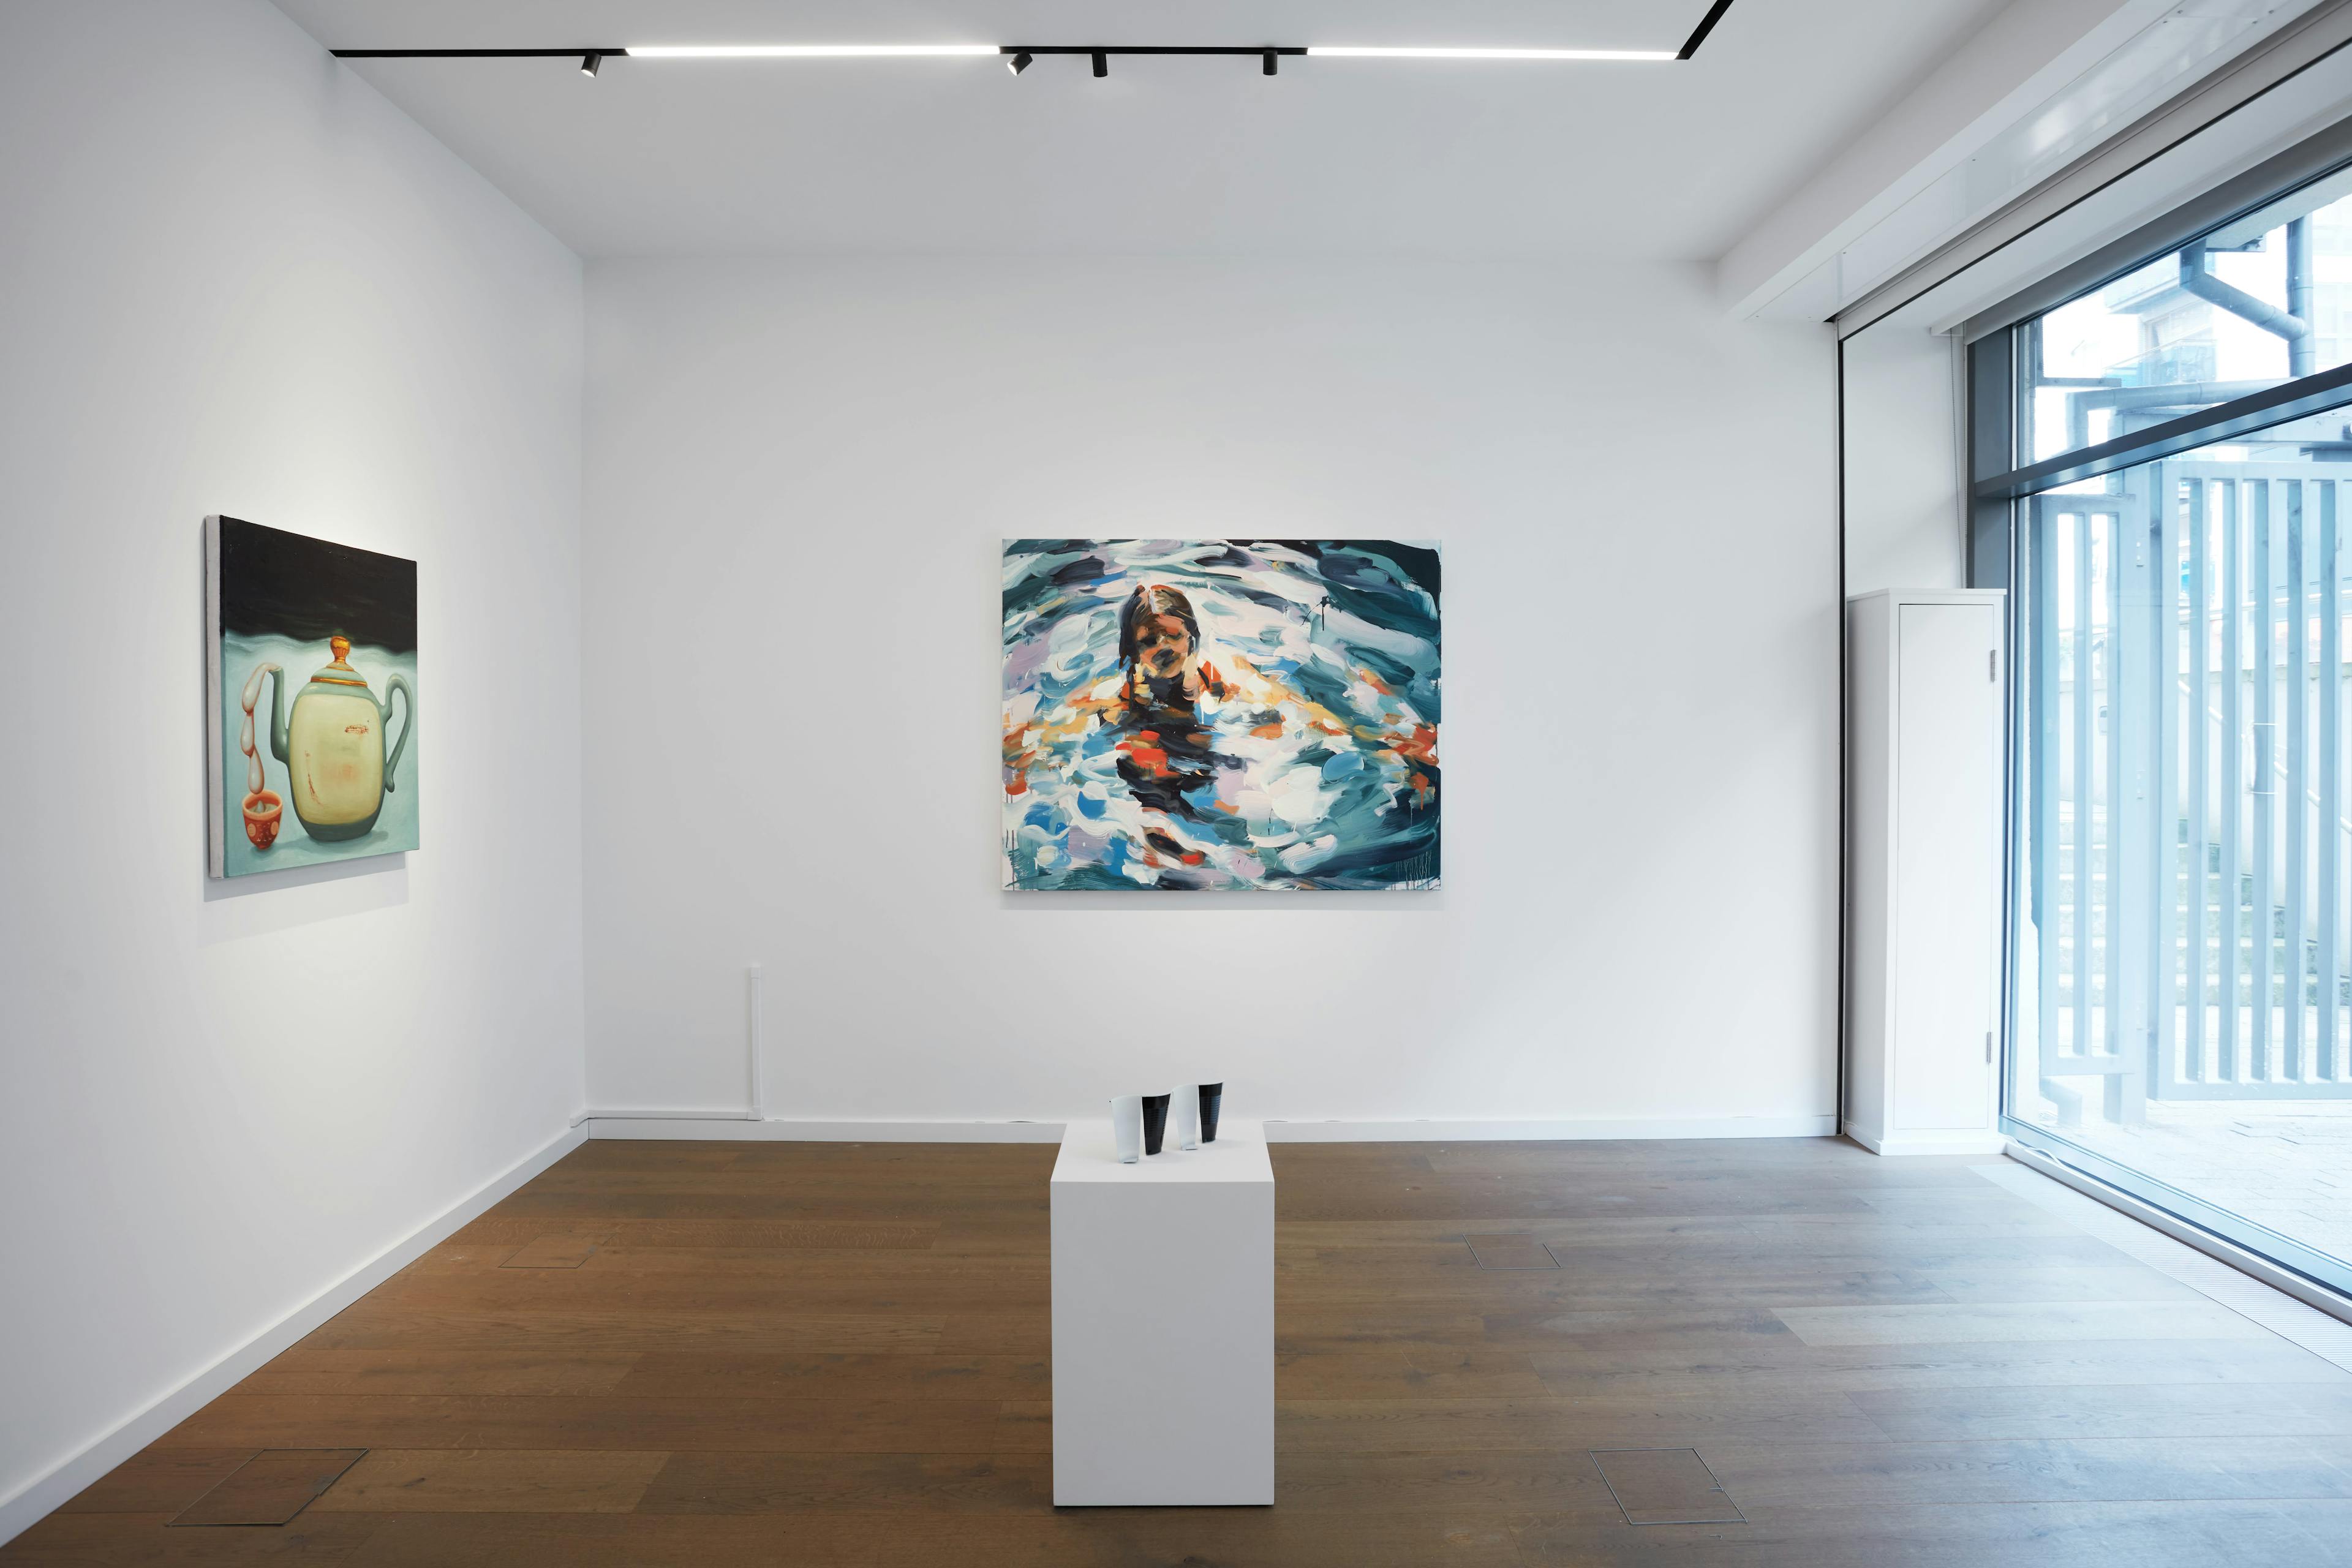 Installation photographs of 'This is Water' a group exhibition at Workplace | London